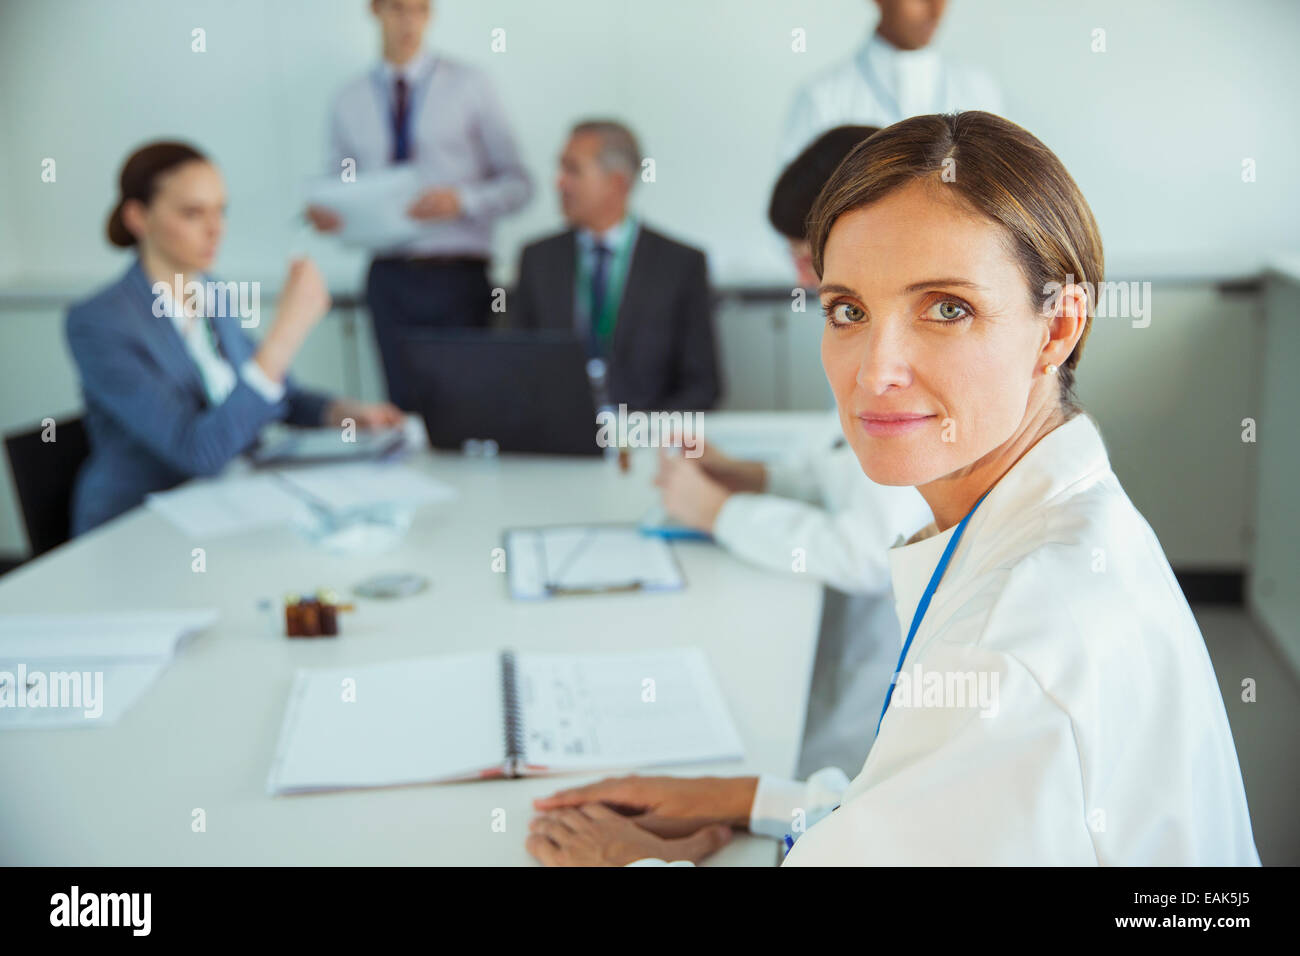 Scientist sitting in meeting Stock Photo